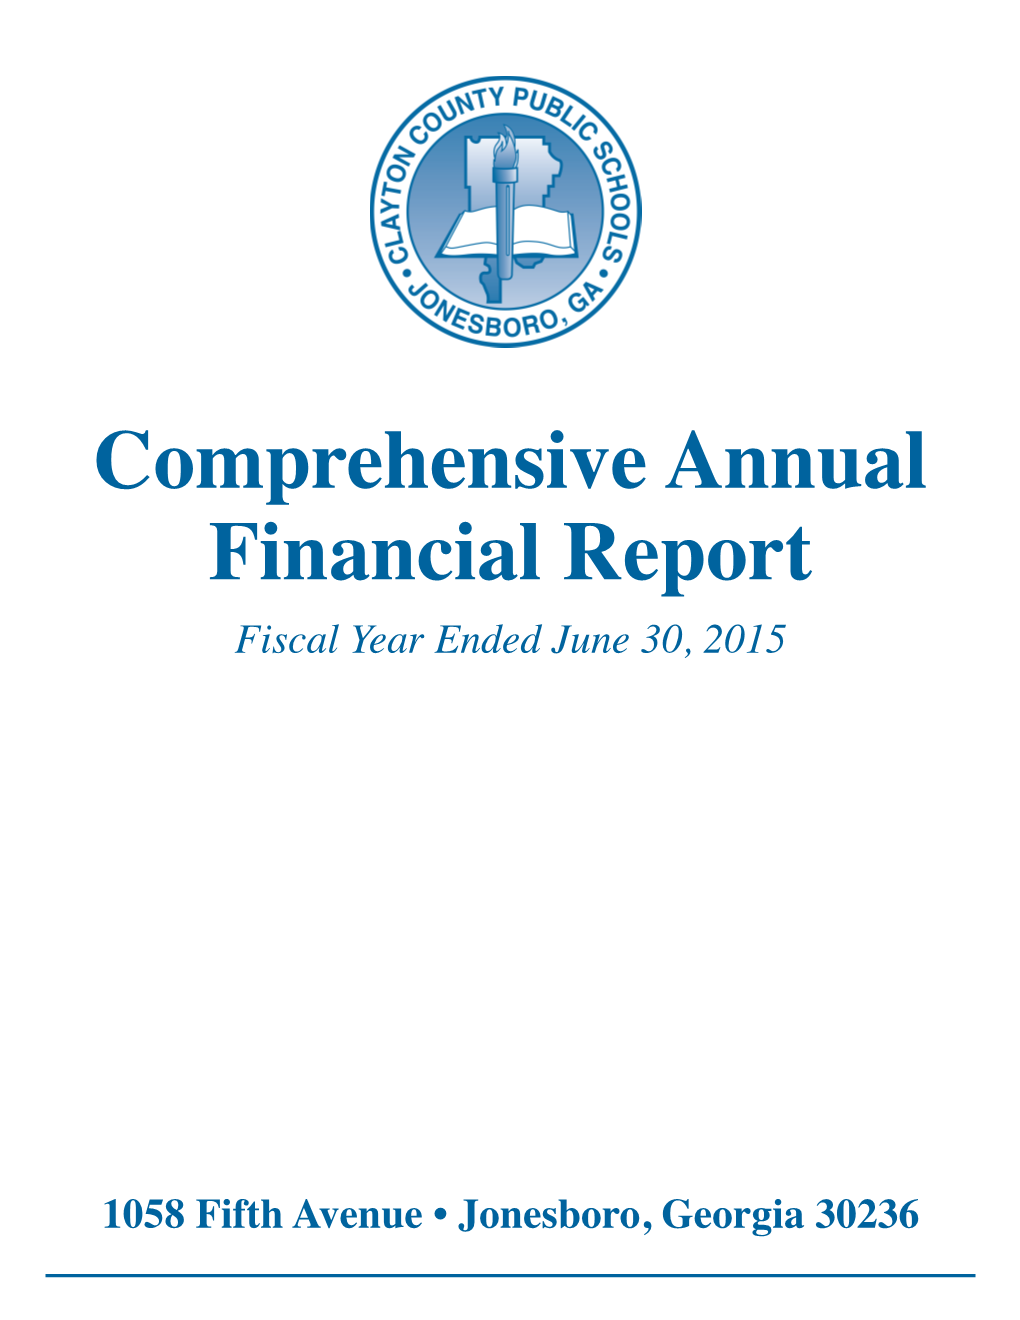 Comprehensive Annual Financial Report Fiscal Year Ended June 30, 2015